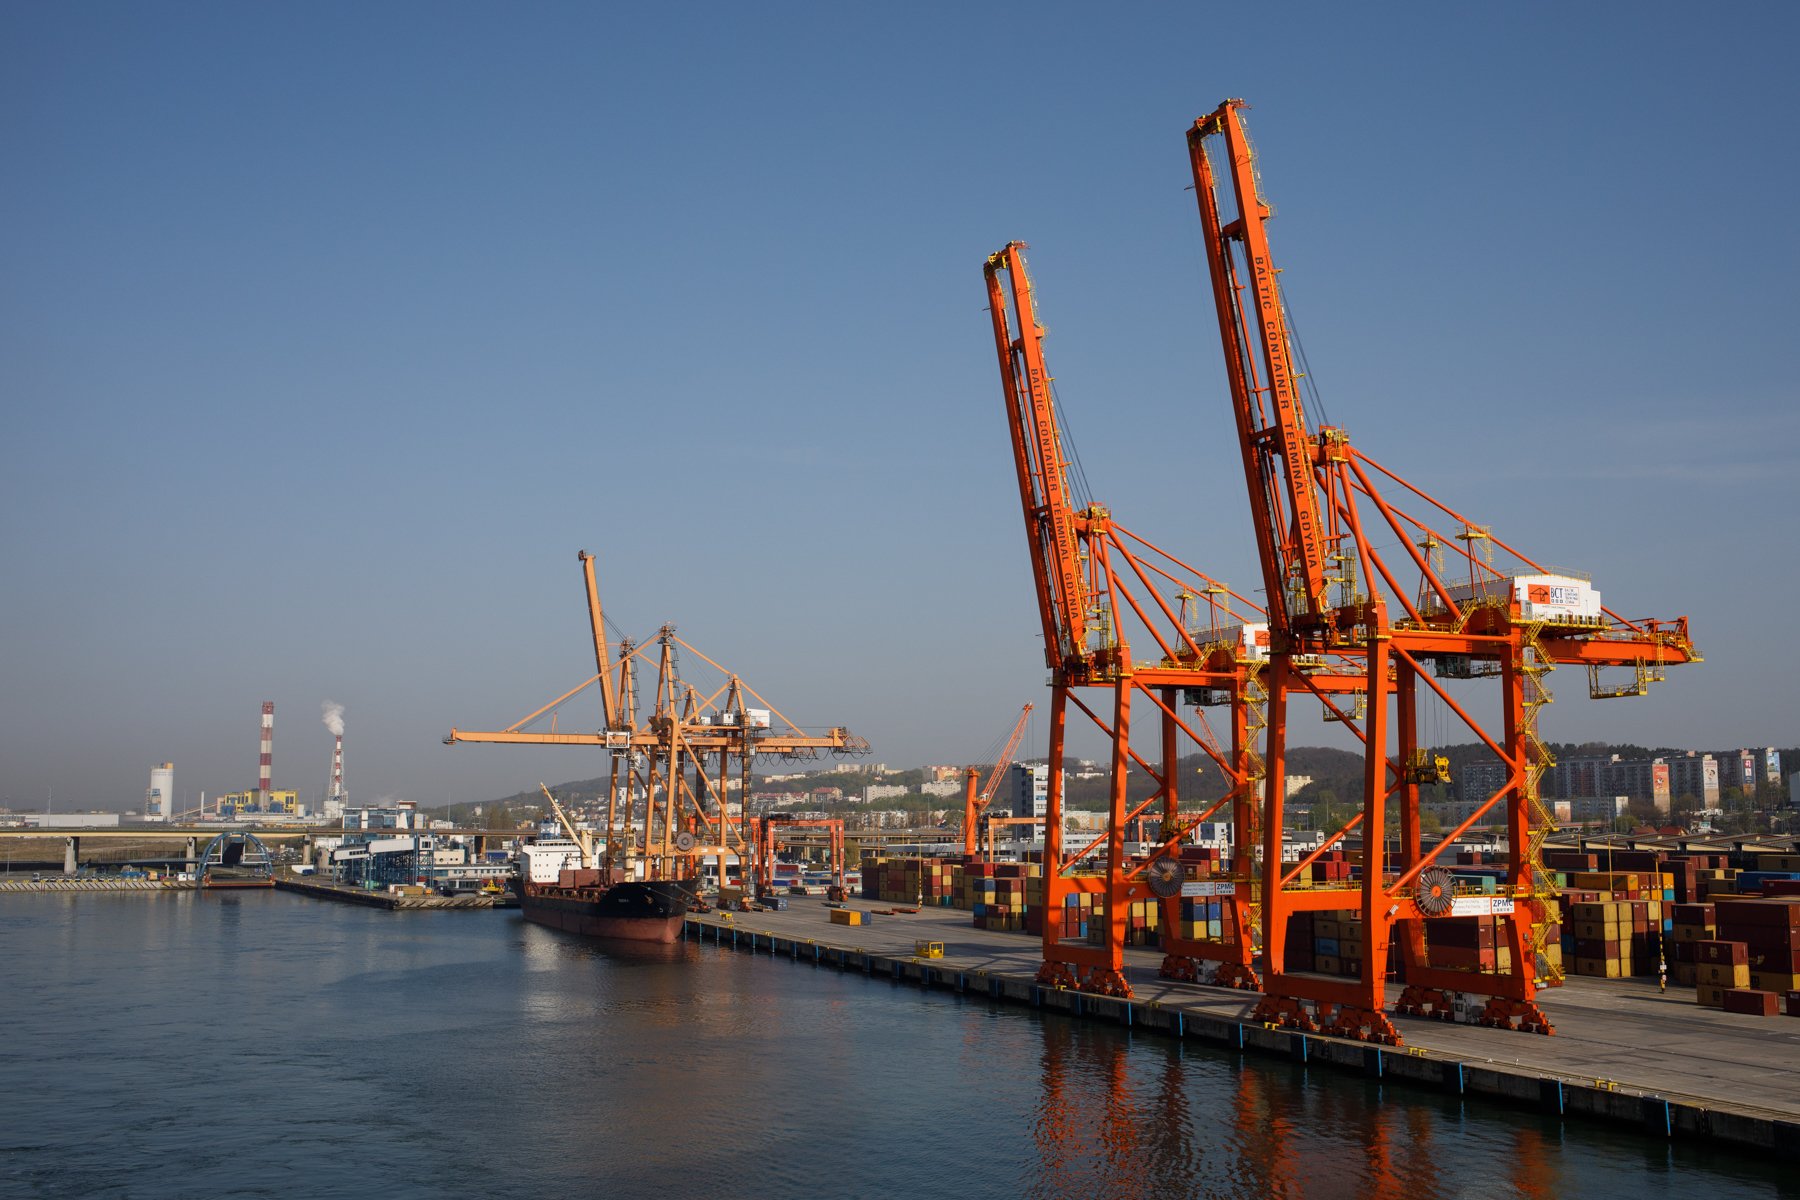  The port of Gdynia is one of the busiest container ports on the Baltic Sea. Ferries operated by Stena Line link the Polish city with Karlskrona in Sweden. 